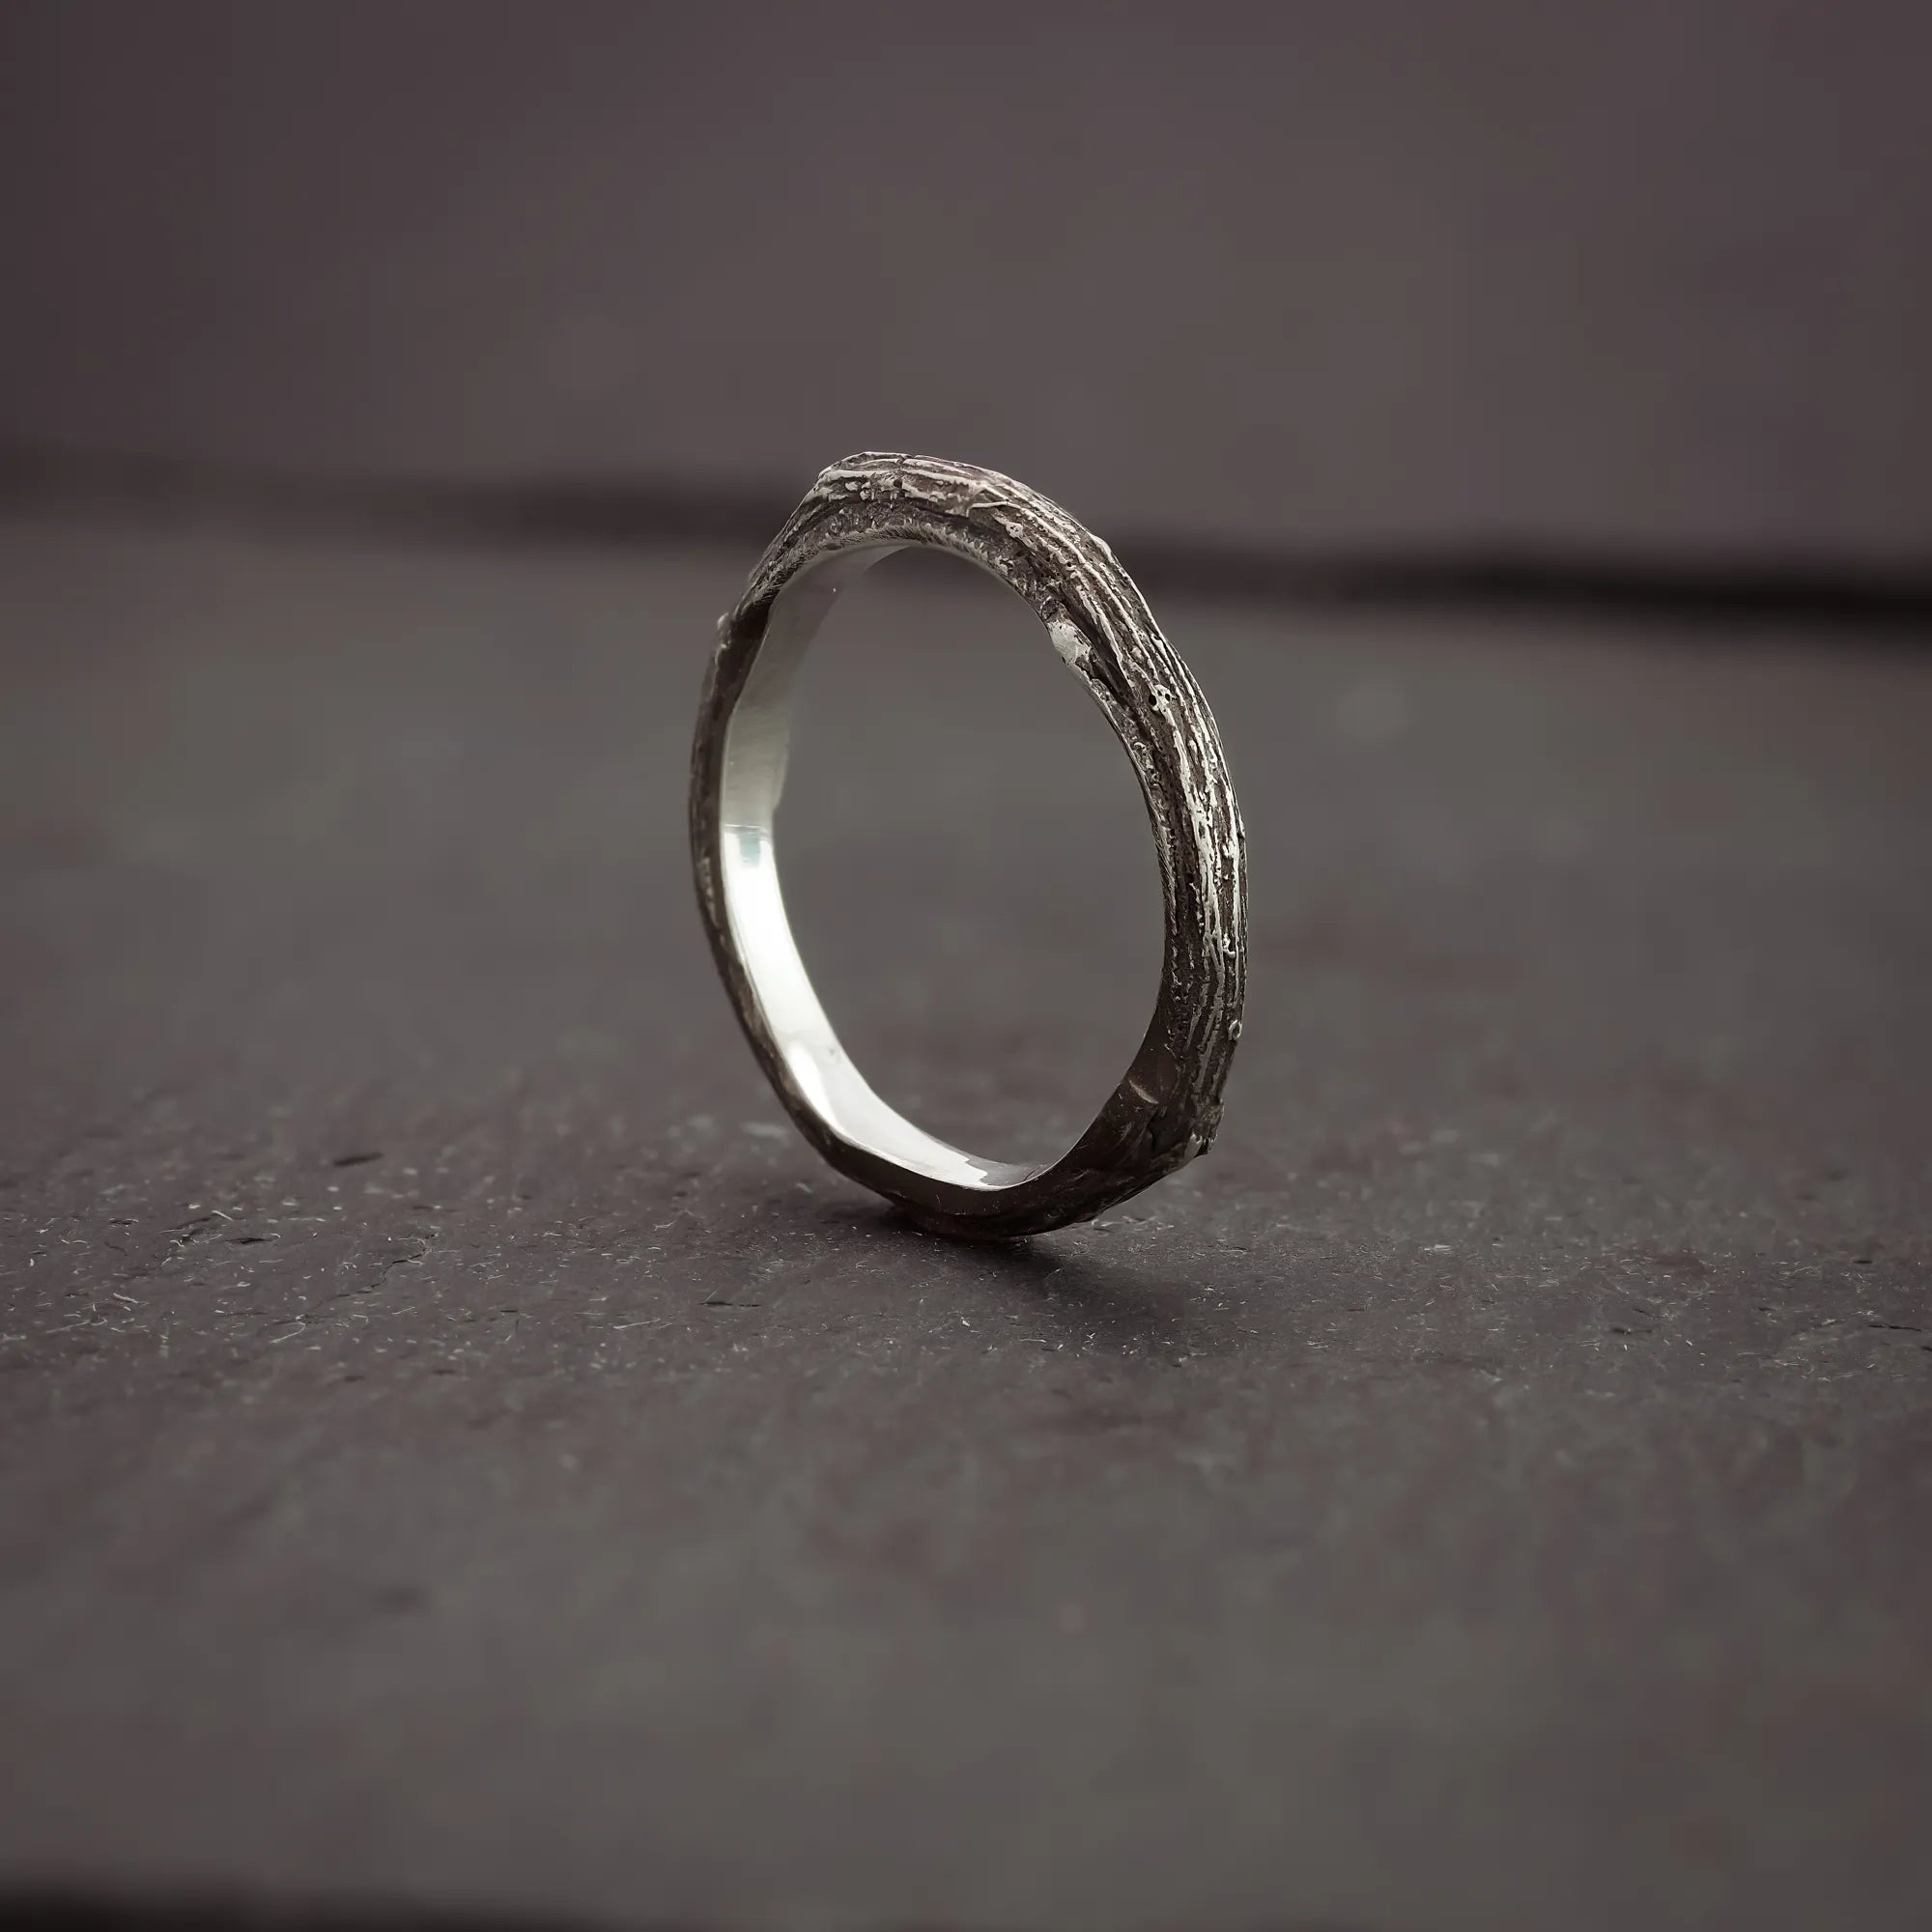 textured branch ring cast in sterling silver. This ring features patina in the recesses for depth and dimension